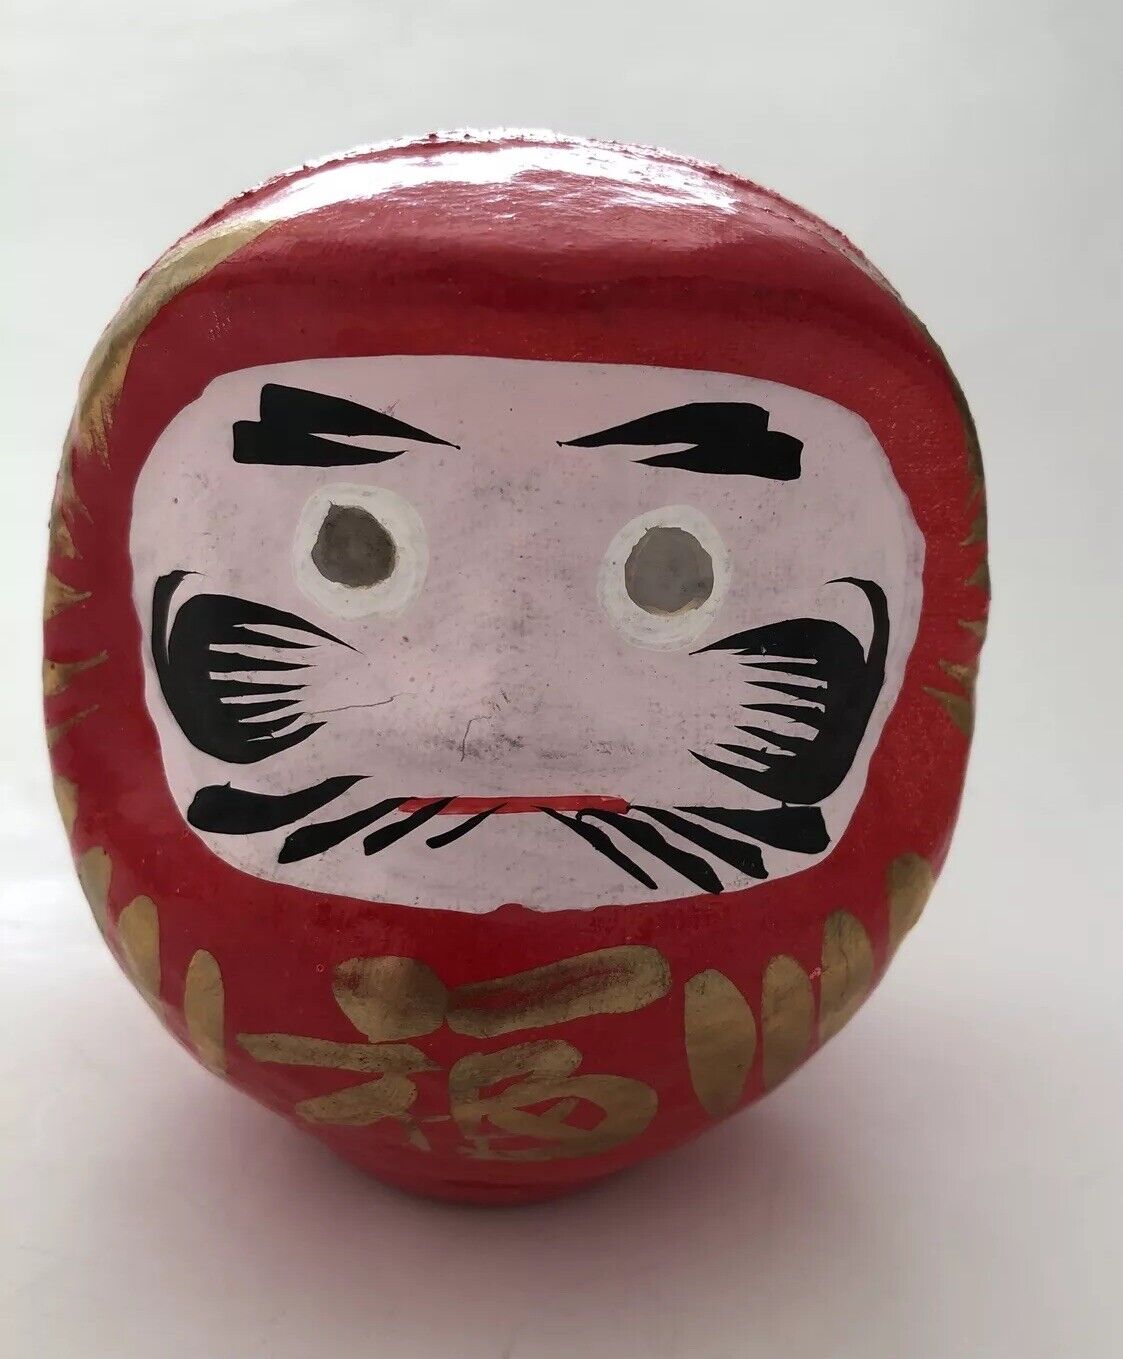 Daruma Dolls in red color / Home decor made in Japan / size: 12cm (4.72in)